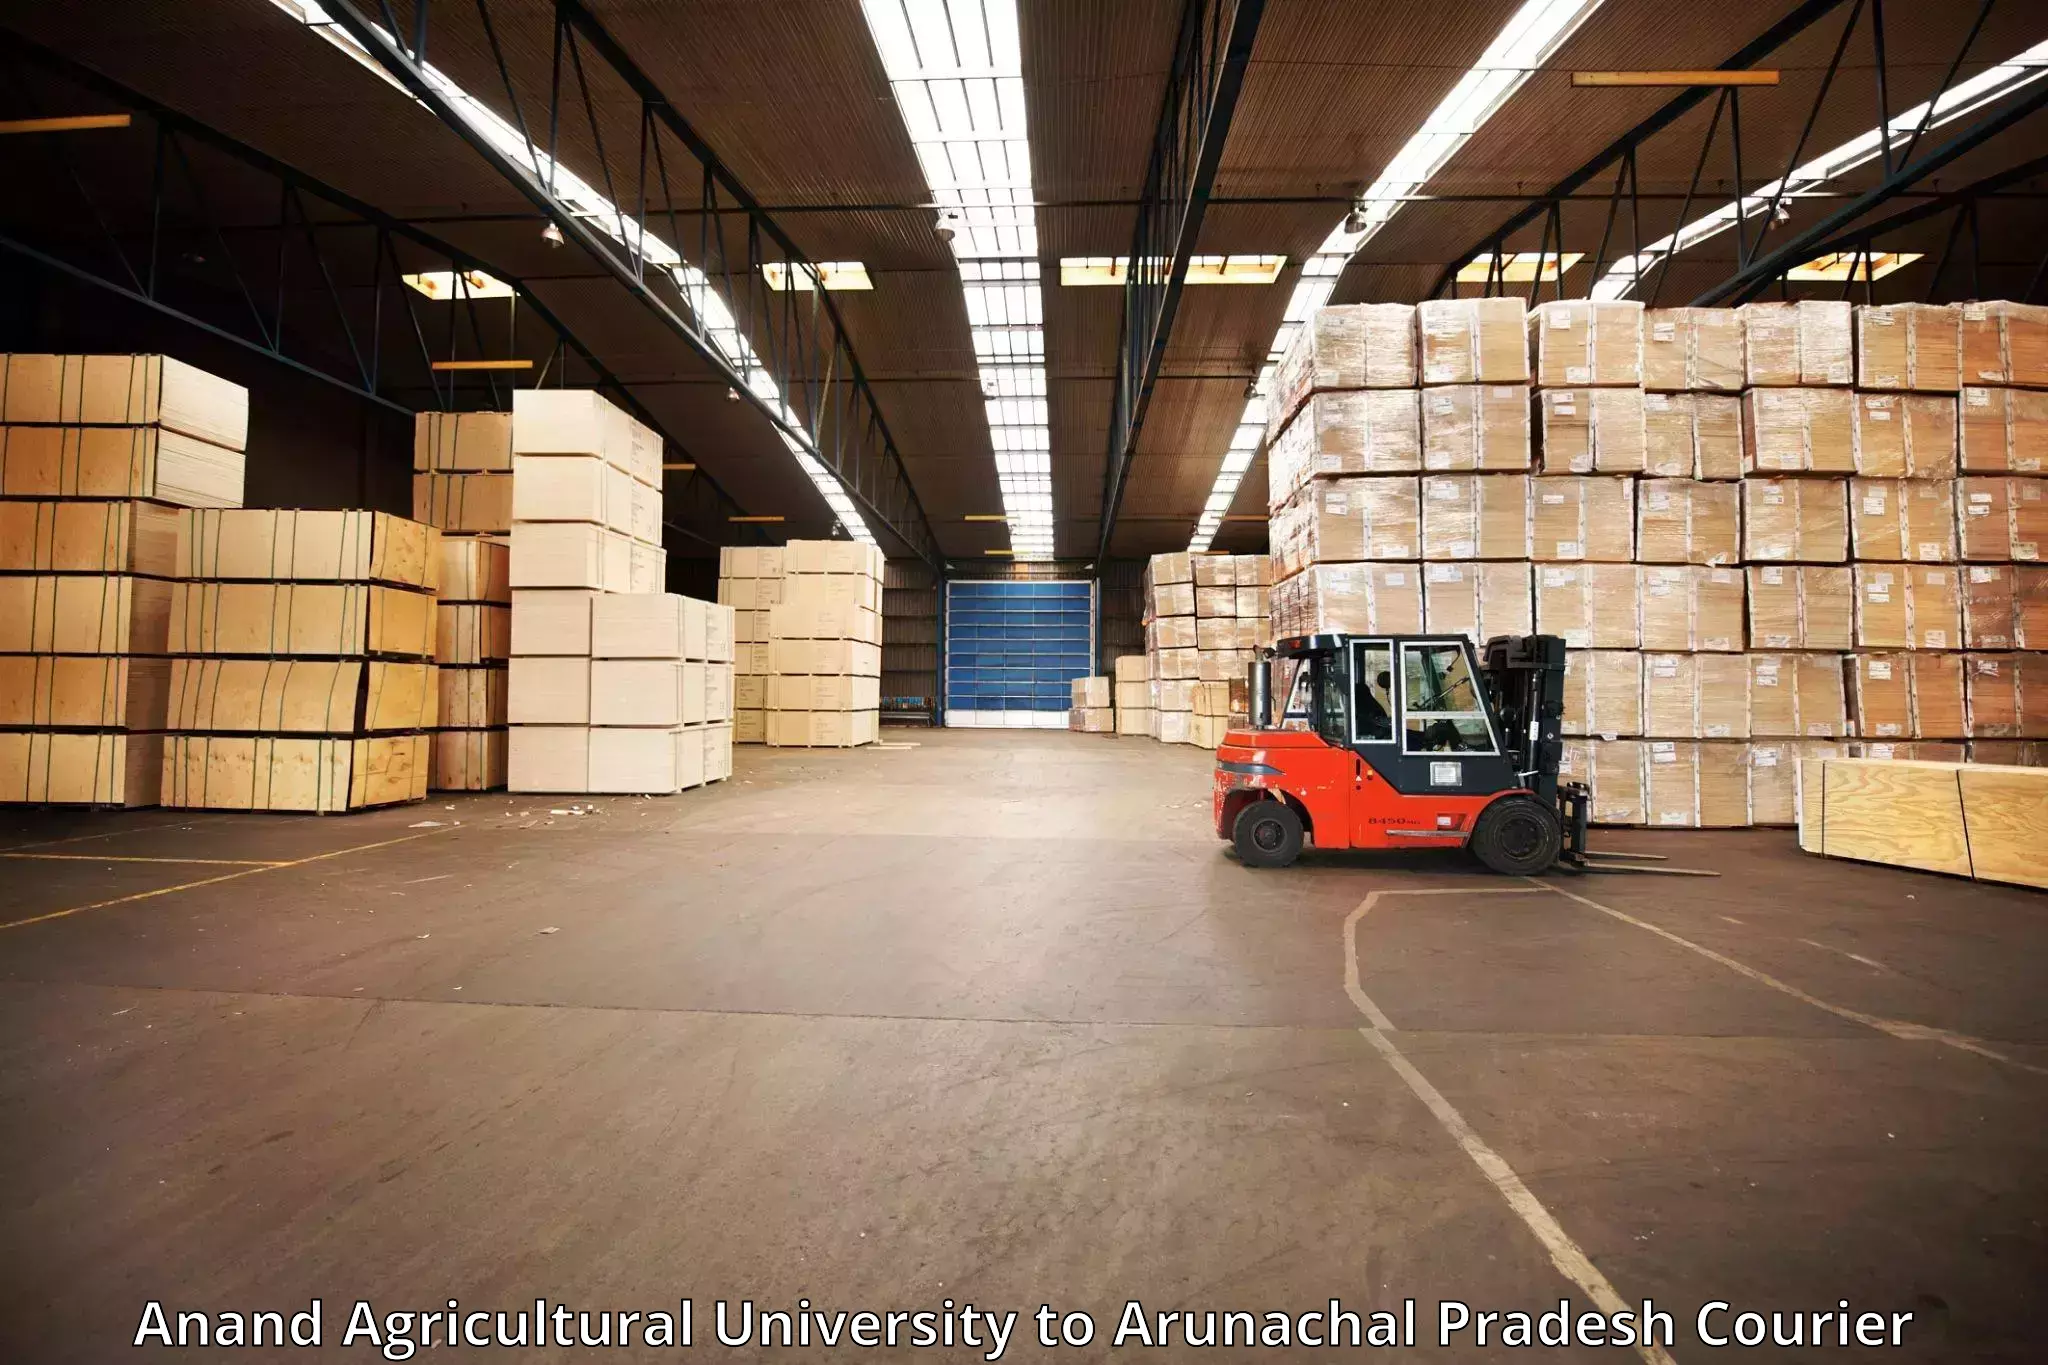 Baggage shipping service Anand Agricultural University to Arunachal Pradesh